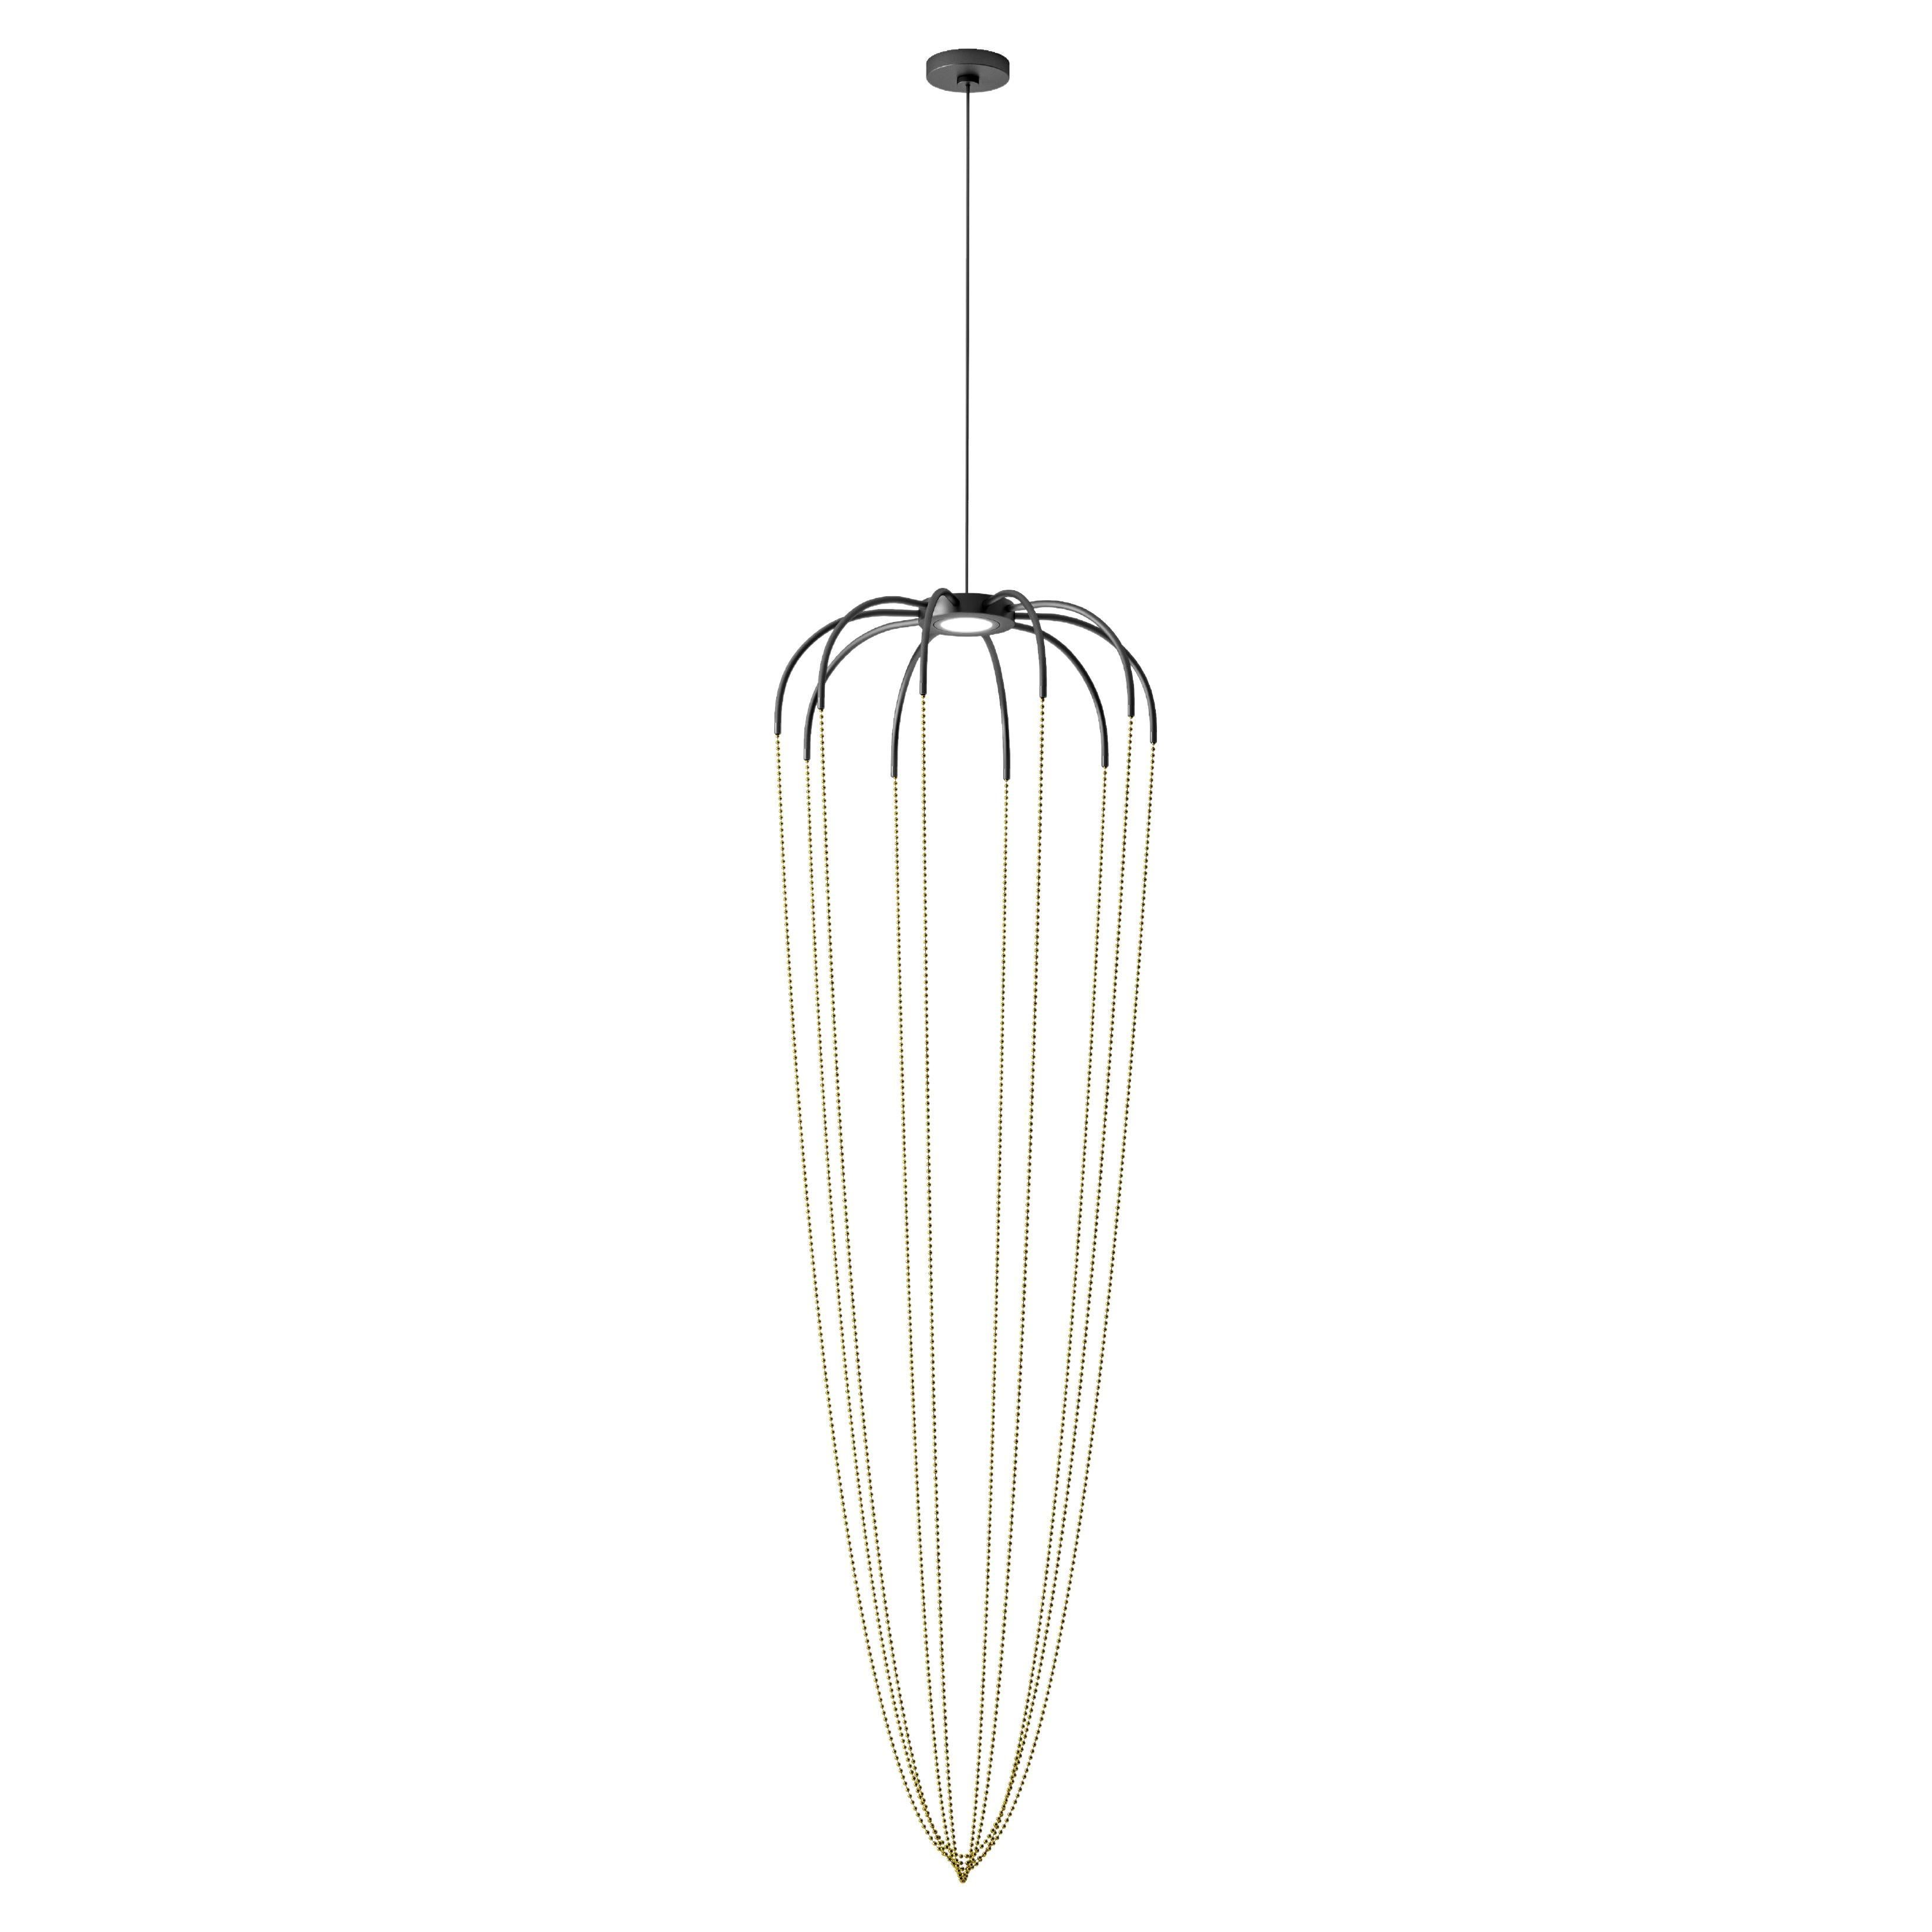 Axolight Alysoid Large Pendant Lamp in Anthracite Grey with Brass Chains For Sale